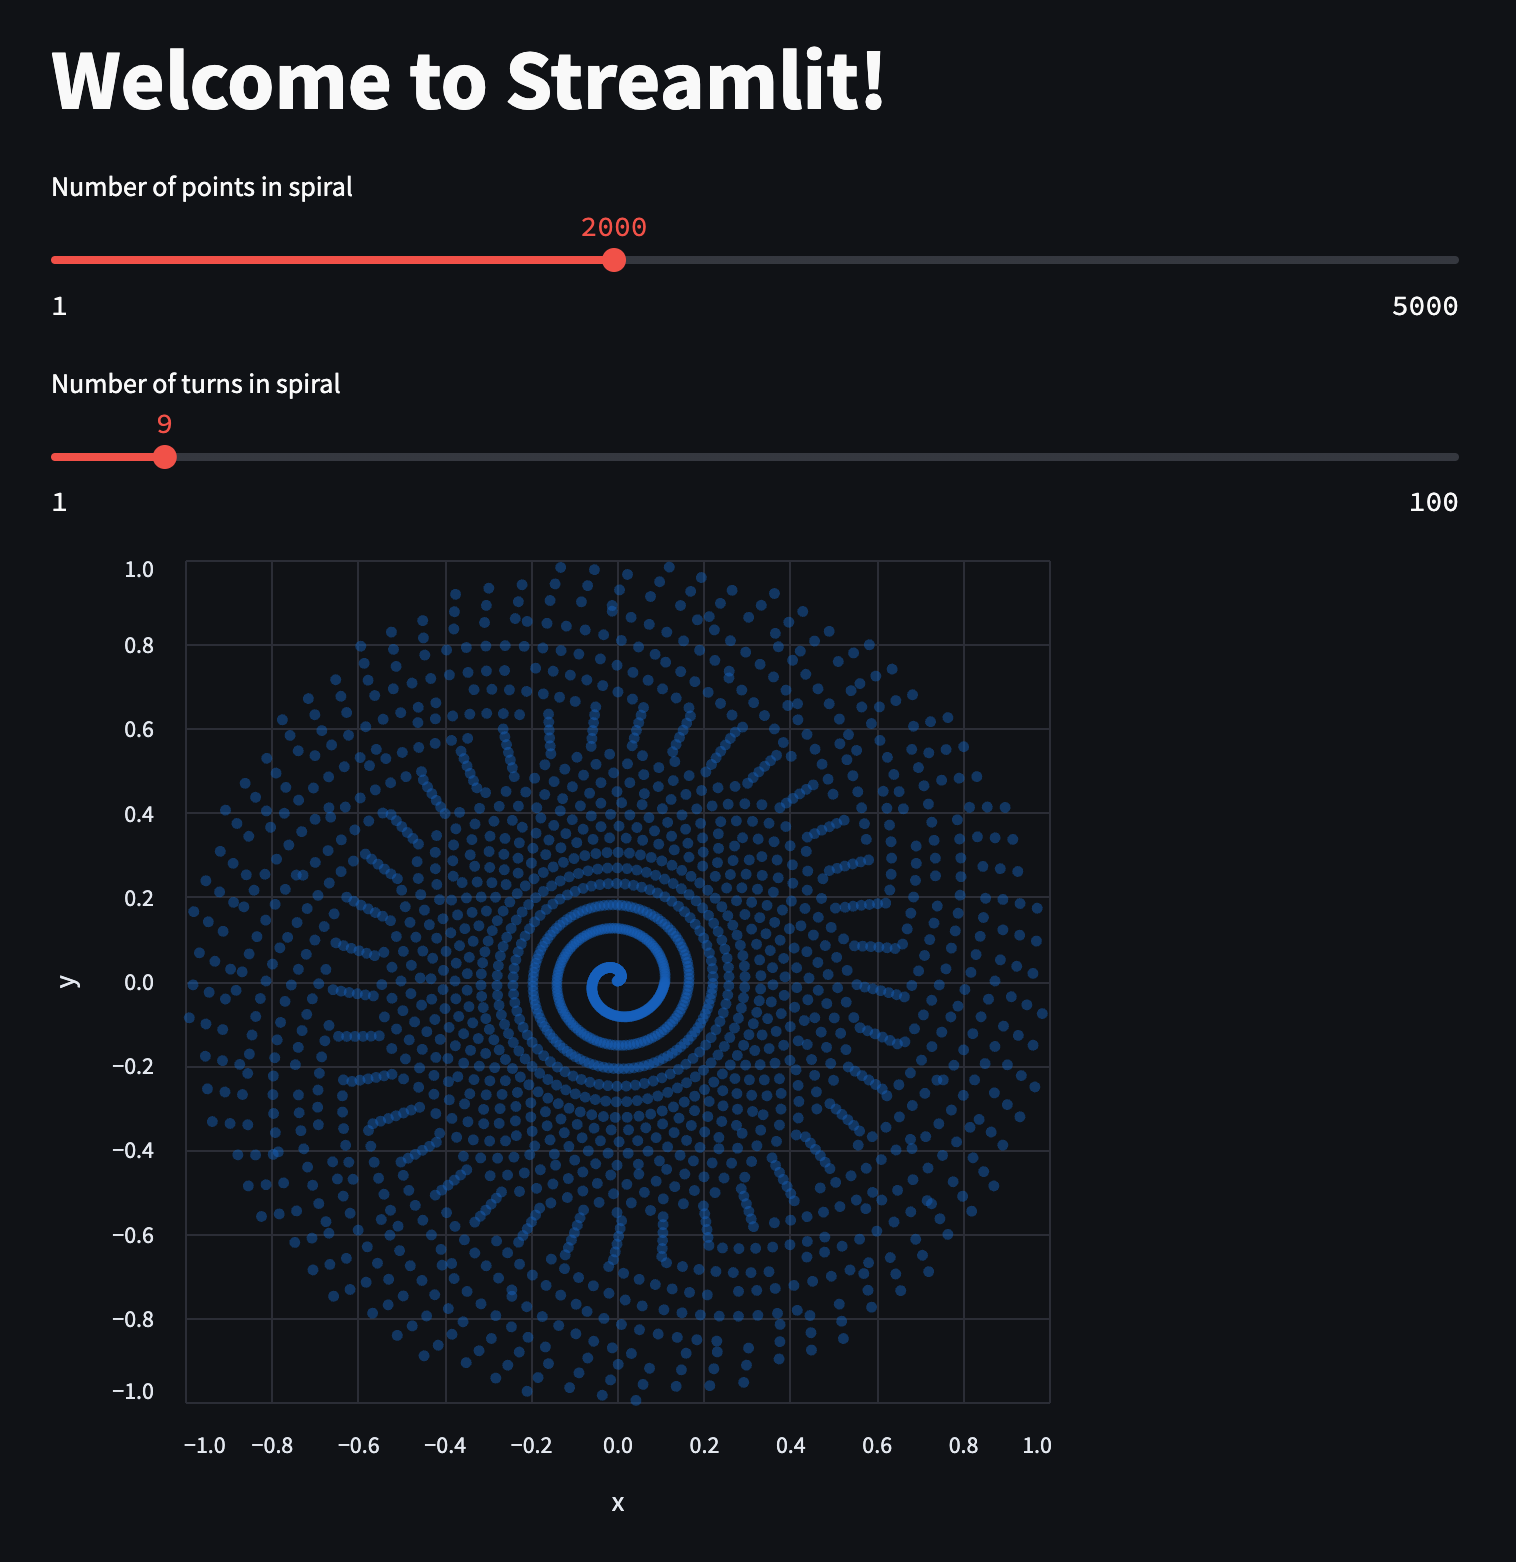 Streamlit interactive plot of a spiral of points with two sliders to adjust the number of points and the number of turns in the spiral